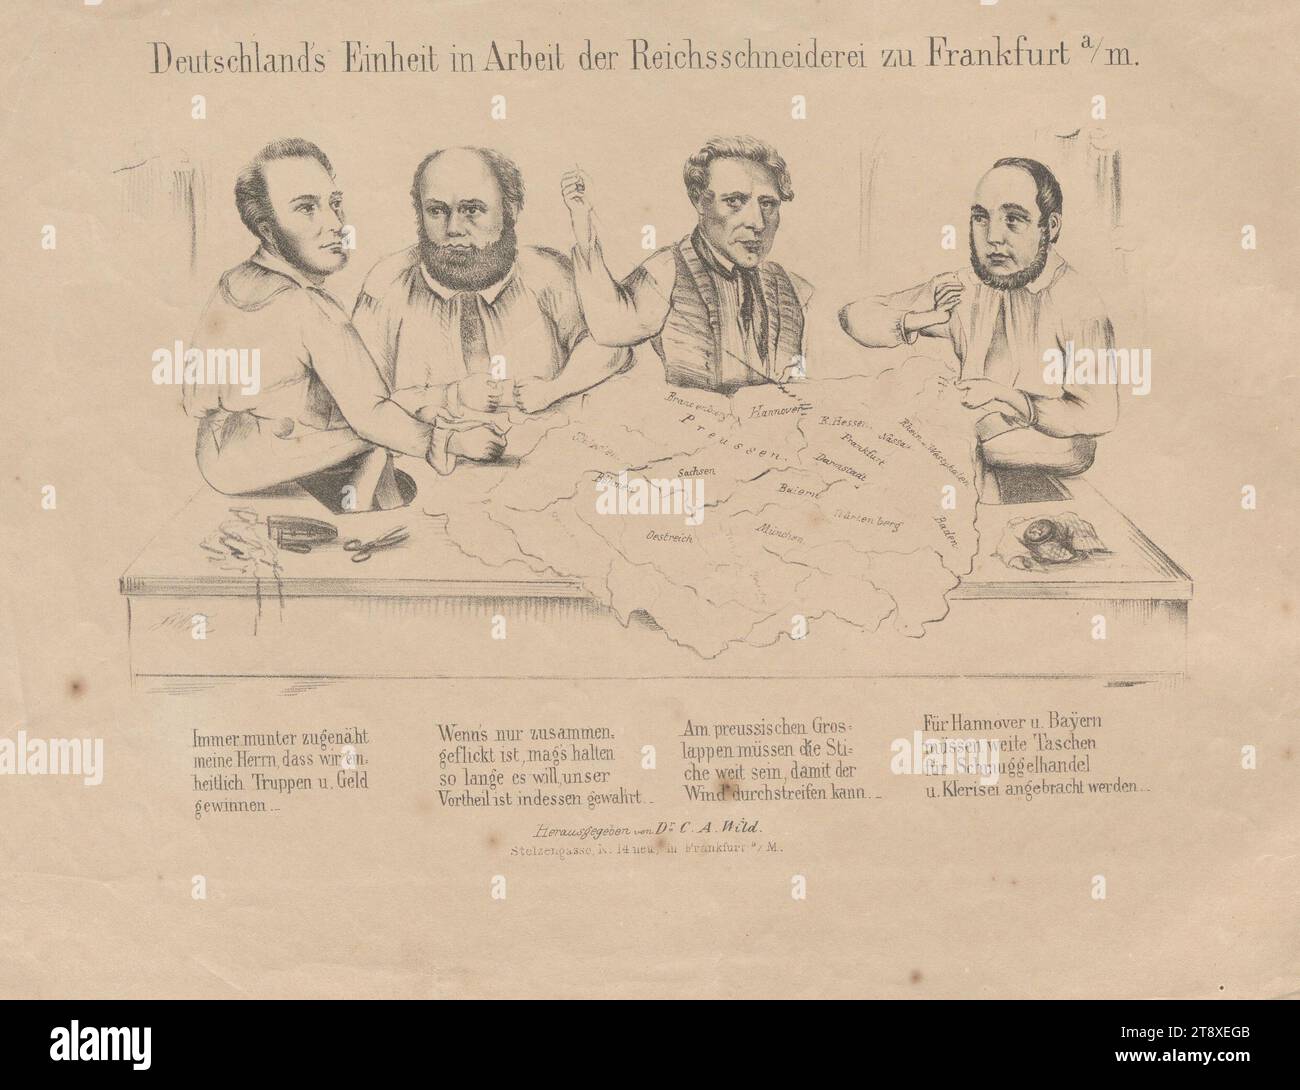 Germany's unity in work of the Reichsschneiderei zu Frankfurt a, m.' (Caricature on the National Assembly in Frankfurt 1848: (The president of the National Assembly Heinrich von Gagern, the vice-president, Alexander von Soiron and two deputies sew Germany together in the form of a map.), C. A. Wild, publisher, 1848, paper, chalk-manner lithograph, height 27 cm, width 34 cm, Caricature, Satire, Revolutions of 1848, 1849, Politics, member of parliament, The Vienna Collection Stock Photo